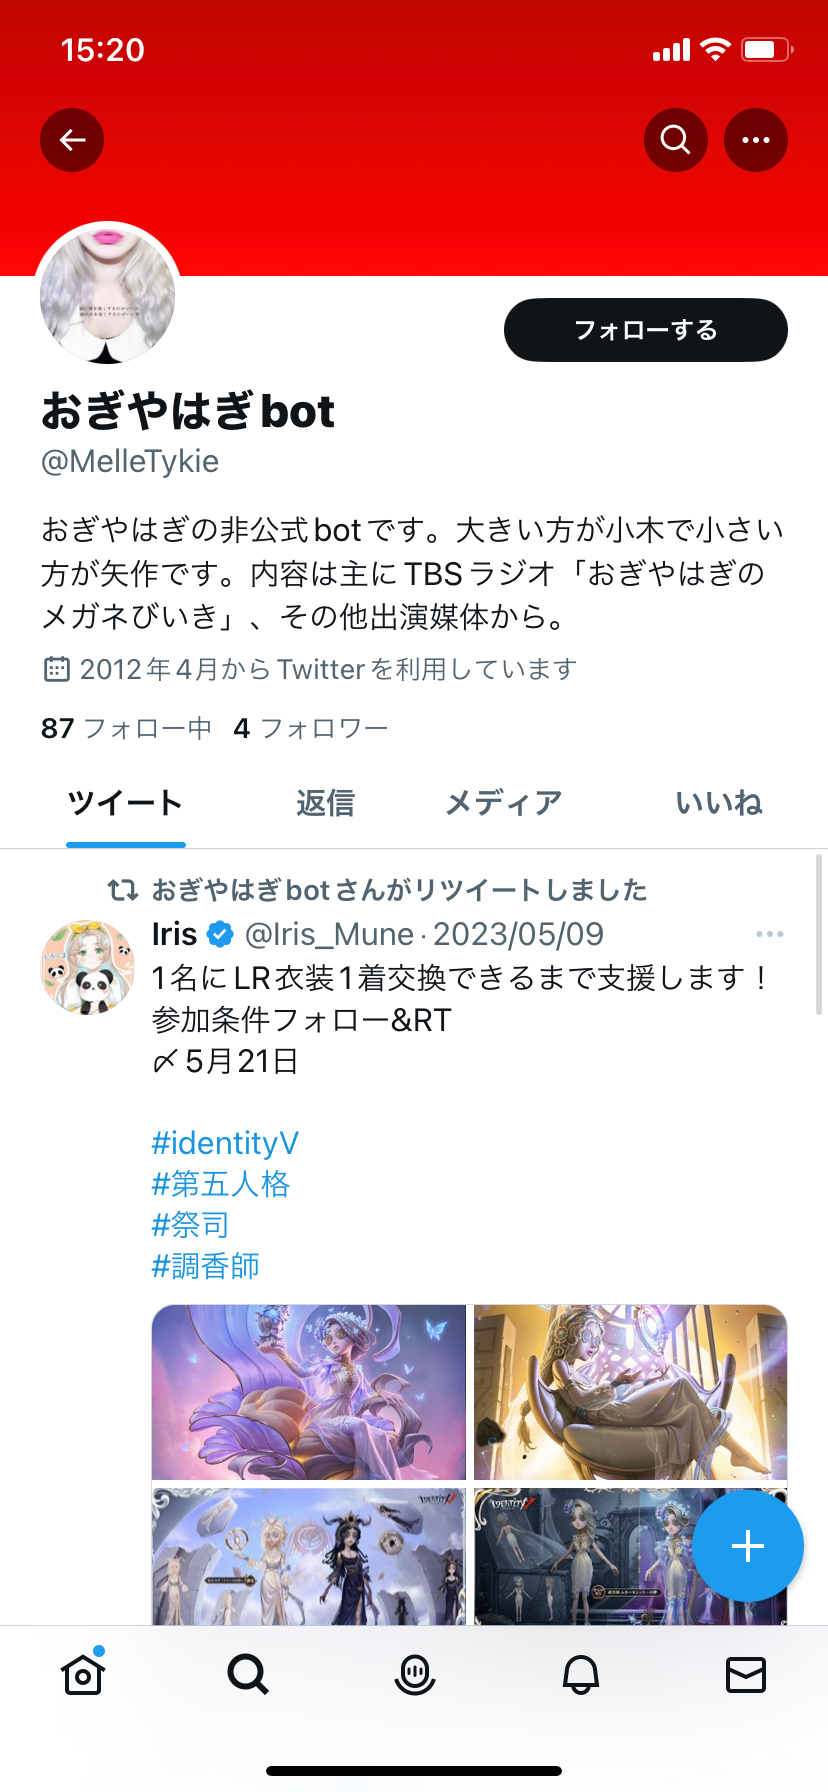 Buy and increase your Twitter Japanese followers